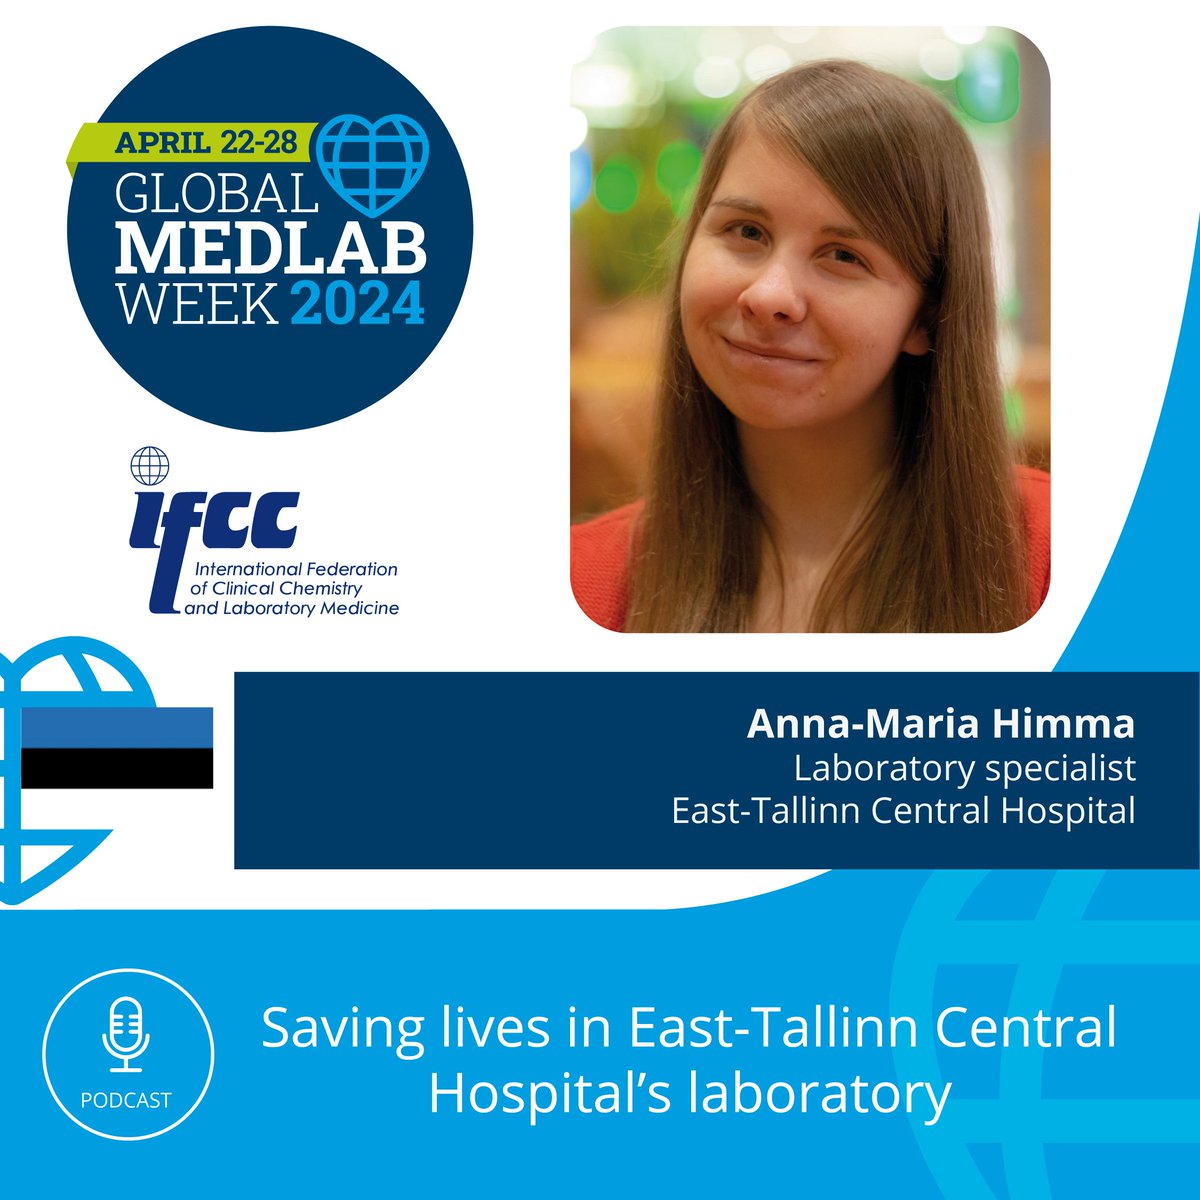 PODCAST: Saving lives in East-Tallinn Central Hospital’s laboratory. podcasters.spotify.com/pod/show/ifcc/… Anna-Maria Himma. Laboratory Specialist, East-Tallinn Central Hospital. Estonia.